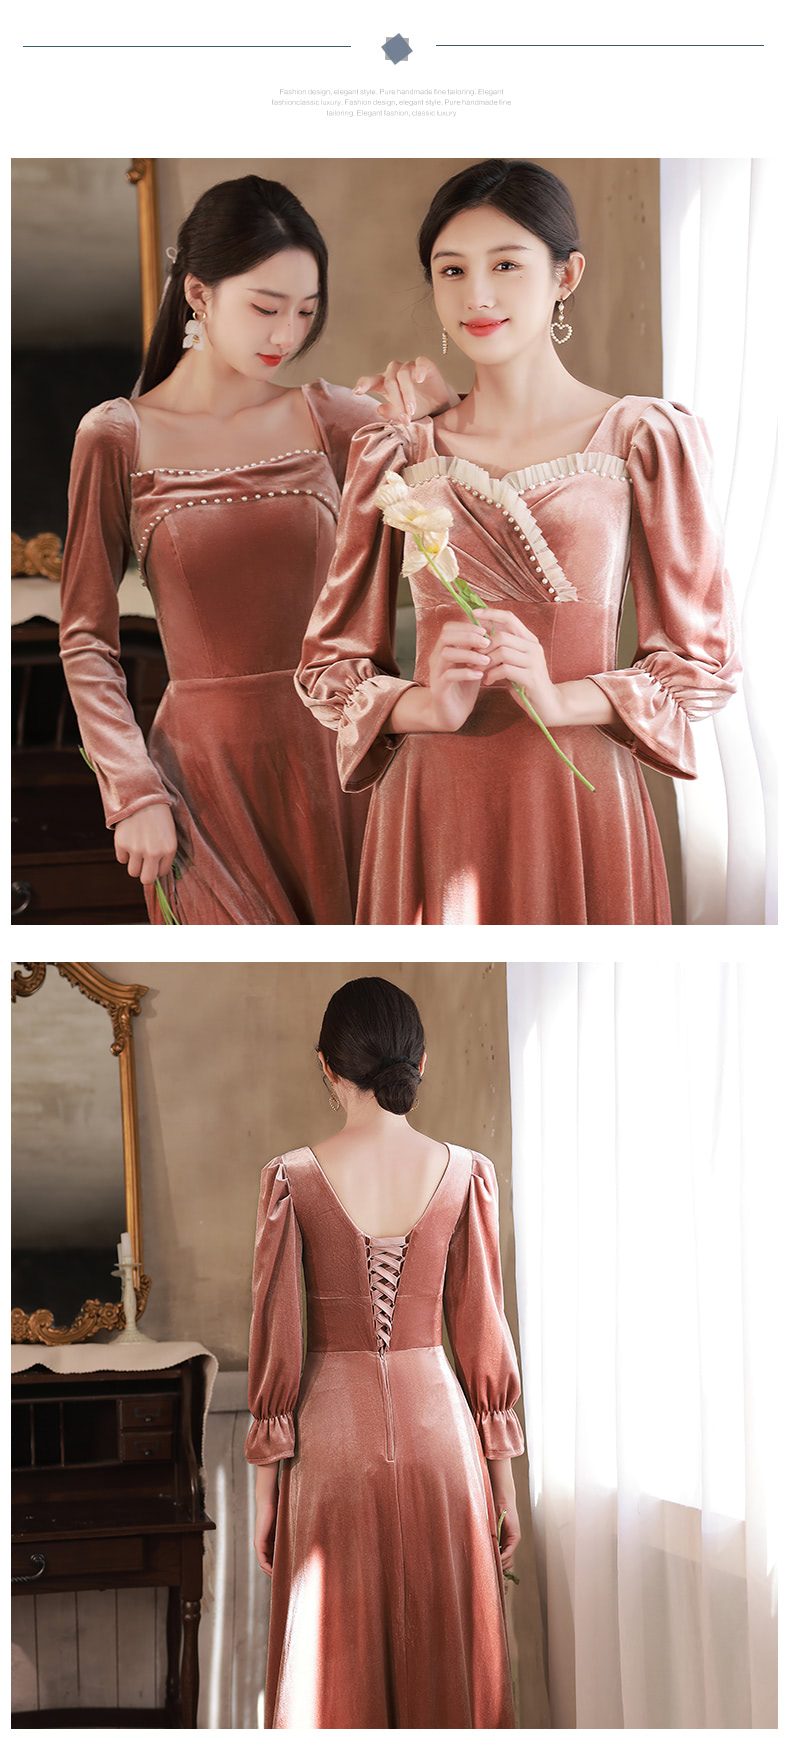 Pink-Velvet-Long-Sleeve-Bridesmaid-Dress-Maid-of-Honor-Party-Gown13.jpg